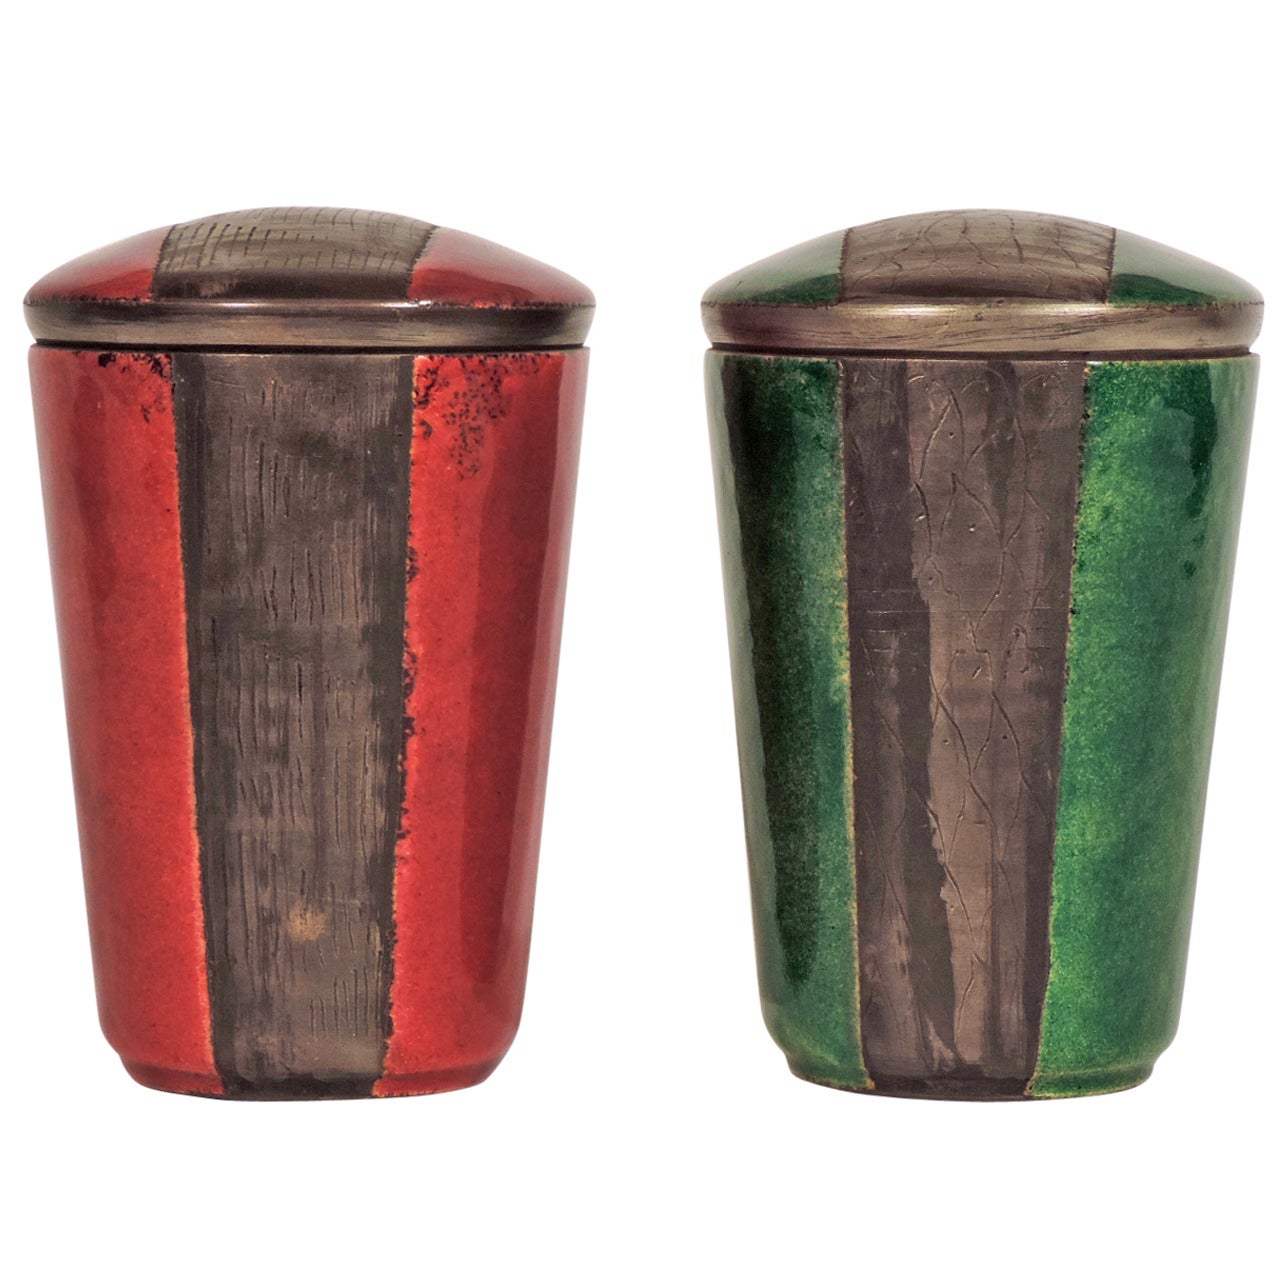 Pair of Italian 1950s Enamel Containers with engravings.